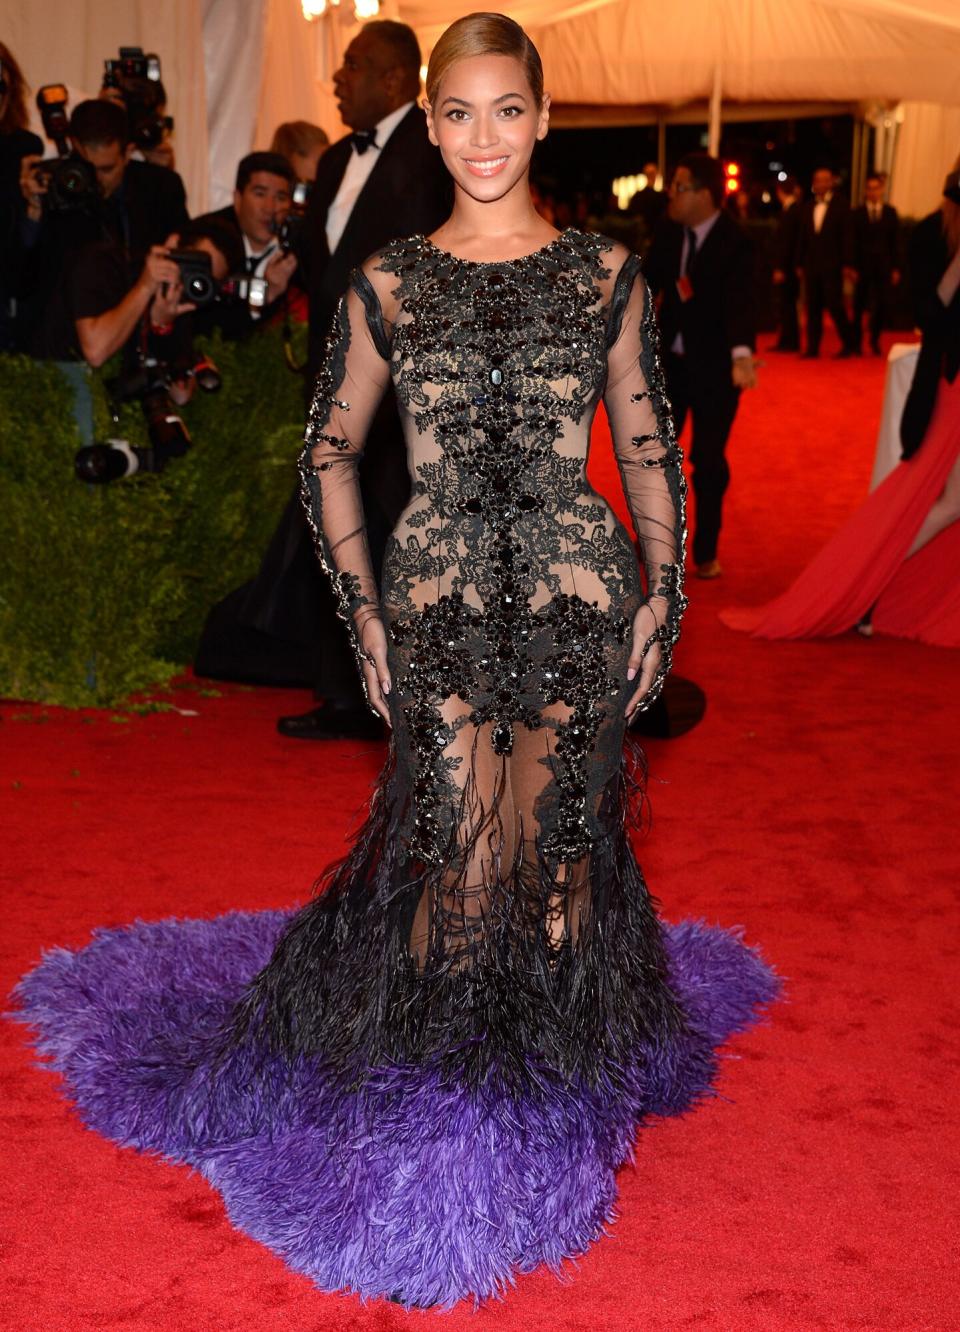 Beyonce Knowles attends the "Schiaparelli And Prada: Impossible Conversations" Costume Institute Gala at the Metropolitan Museum of Art on May 7, 2012 in New York City